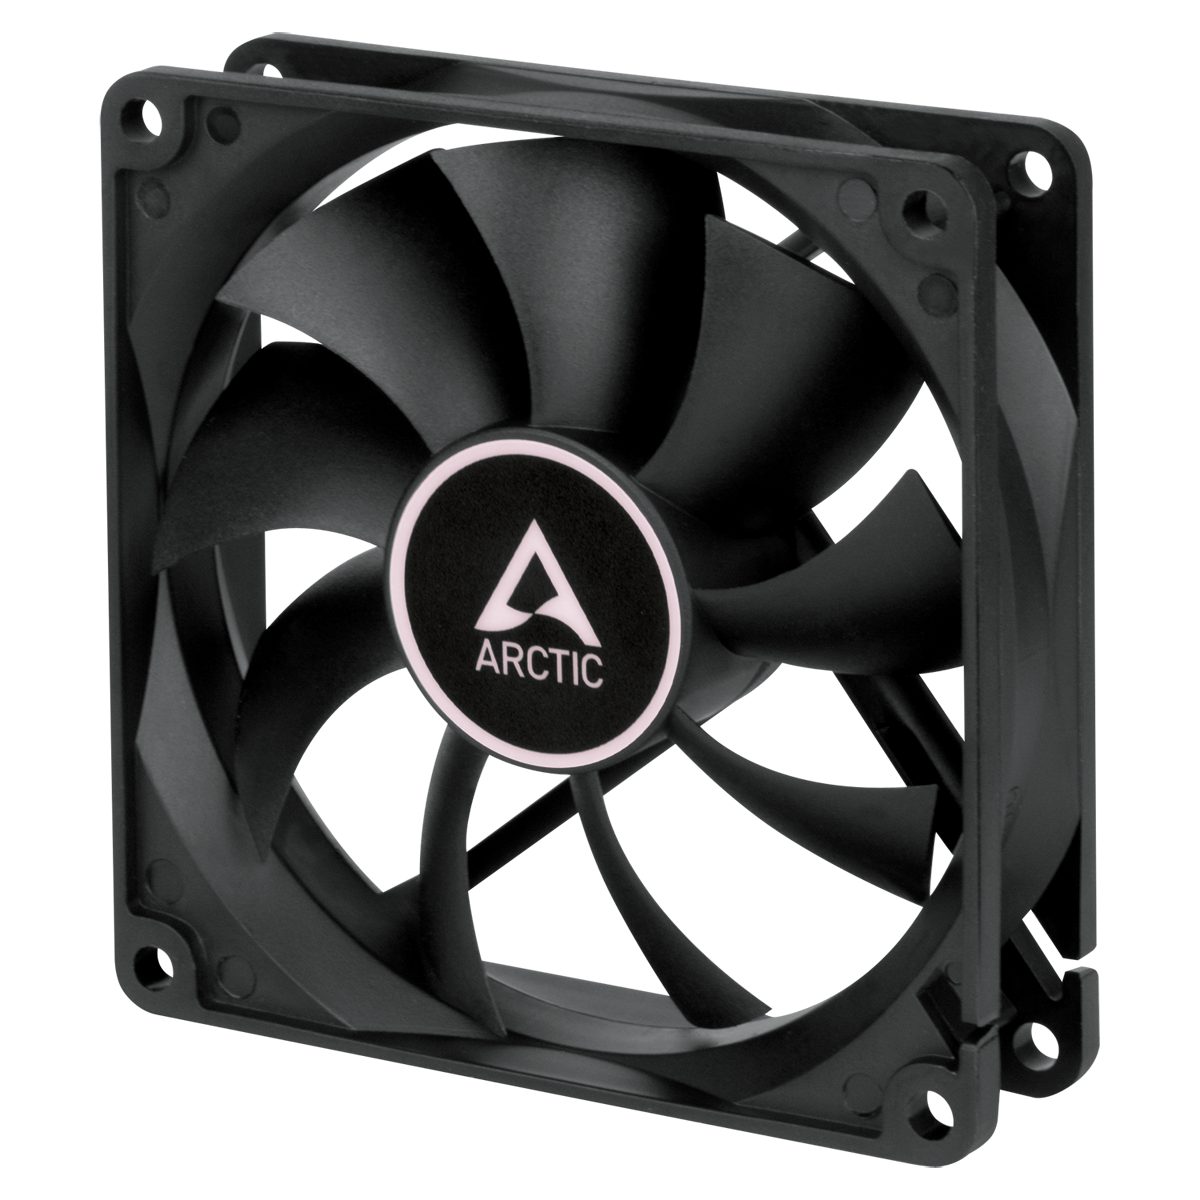 ARCTIC F9 PWM PST Case Fan - 92mm case fan with PWM control and PST cable - Arctic 2.35.64.00.109